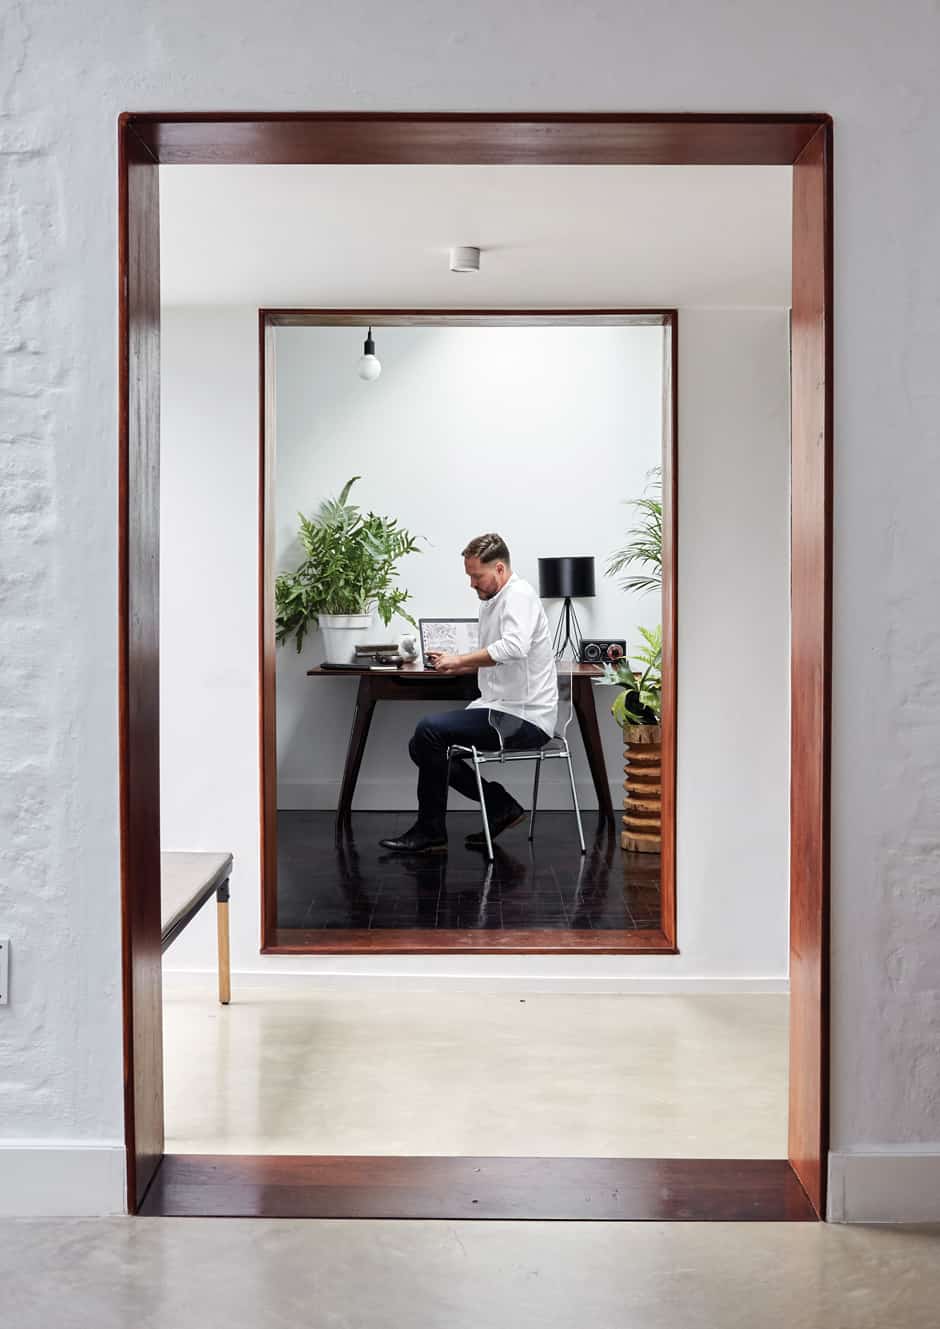 OFFICE Christo is pictured in the entry vestibule connecting the main house to the study, which creates a frame for the vintage desk, the lightness of the composition maintained by a transparent polycarbonate chair. Indoor plants bring an organic element to the clean-lined simplicity of the white, cube-like space, lit from above by skylights. The floor in this area is parquet salvaged from the rest of the house. 